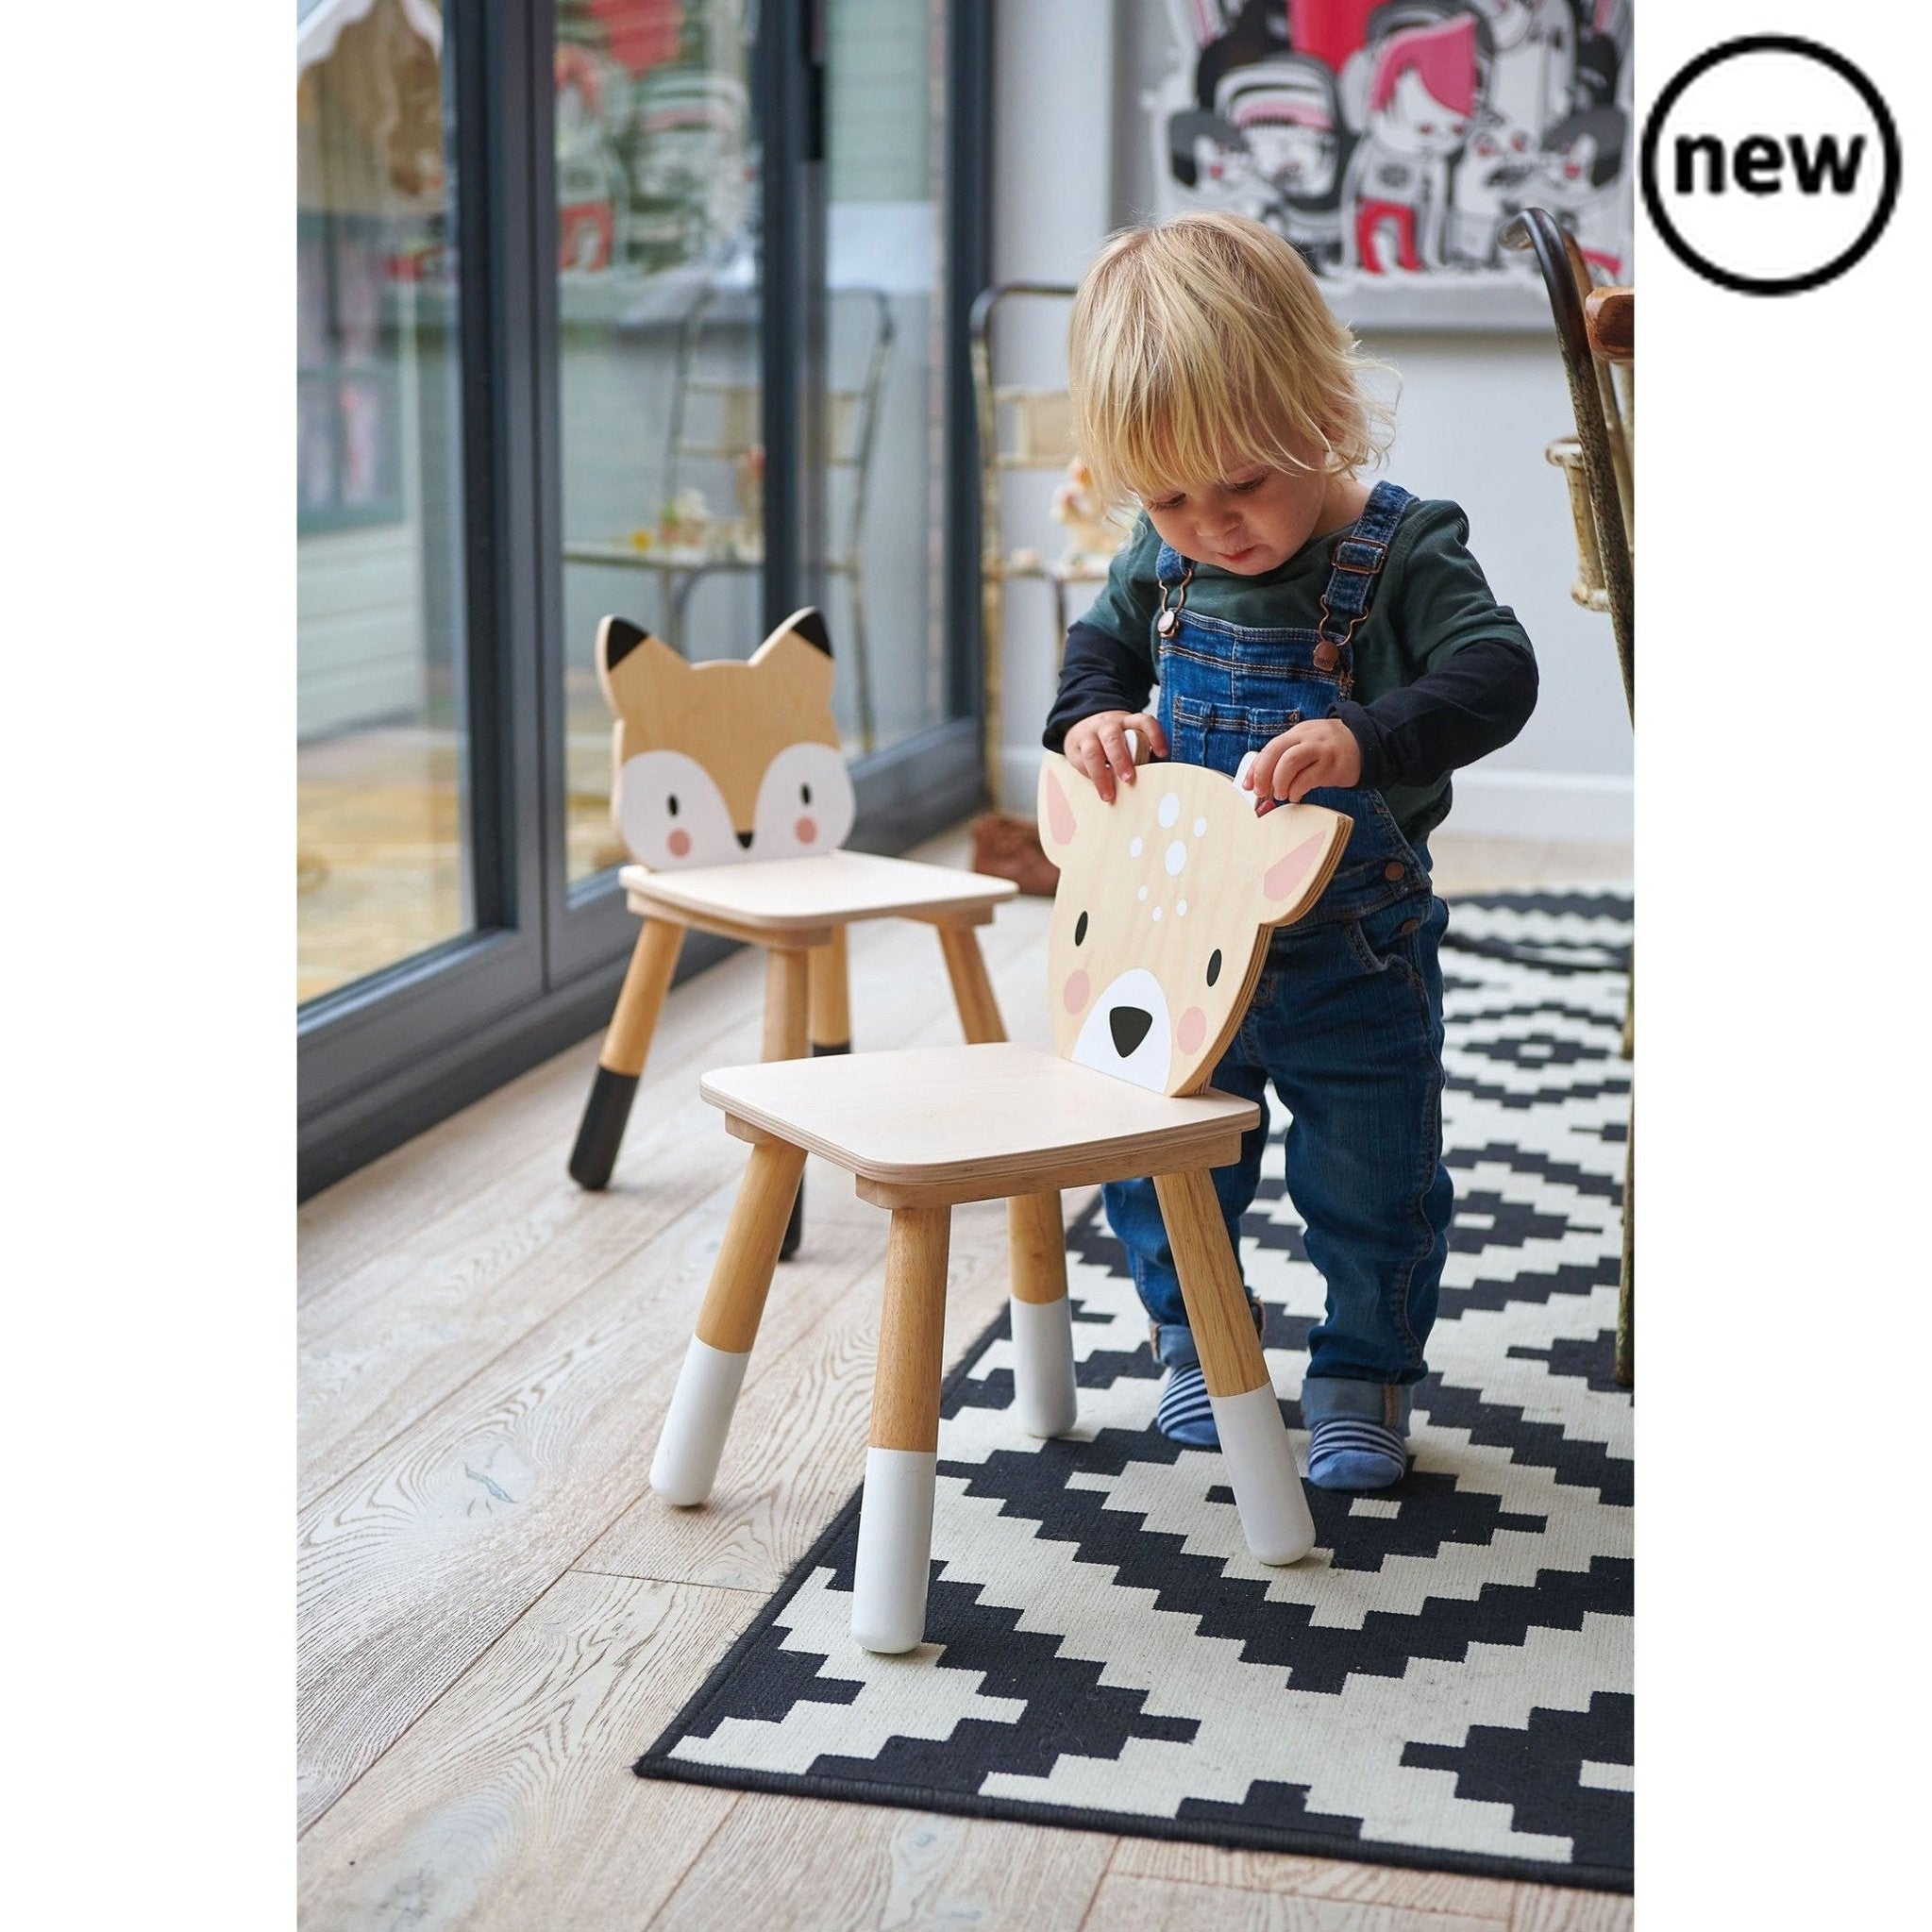 Tenderleaf Toys Wooden Forest Deer Chair, Introducing our whimsical and adorable Deer Chair by Tender Leaf Toys - the perfect addition to any play area or dining table. Crafted with top-quality plywood, this chair is not only durable but also brings a touch of playful charm to any space.Designed to perfectly complement the Tender Leaf Toys Forest Table, this Deer Chair adds an enchanting element to imaginative play and group activities. Children will delight in having their own special seat shaped like a fr